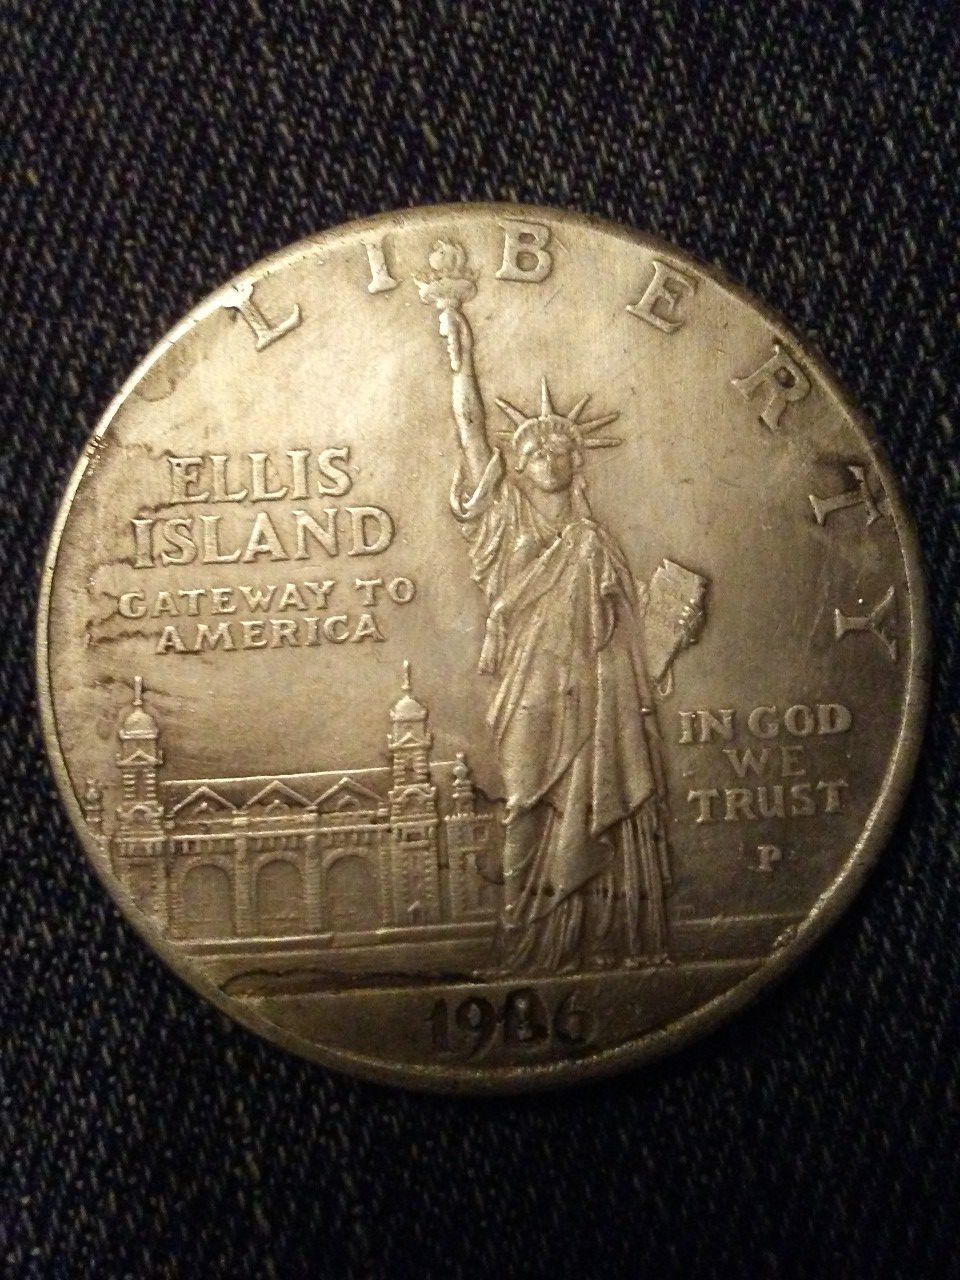 1986 Statue of Liberty Silver Dollar - 90% silver